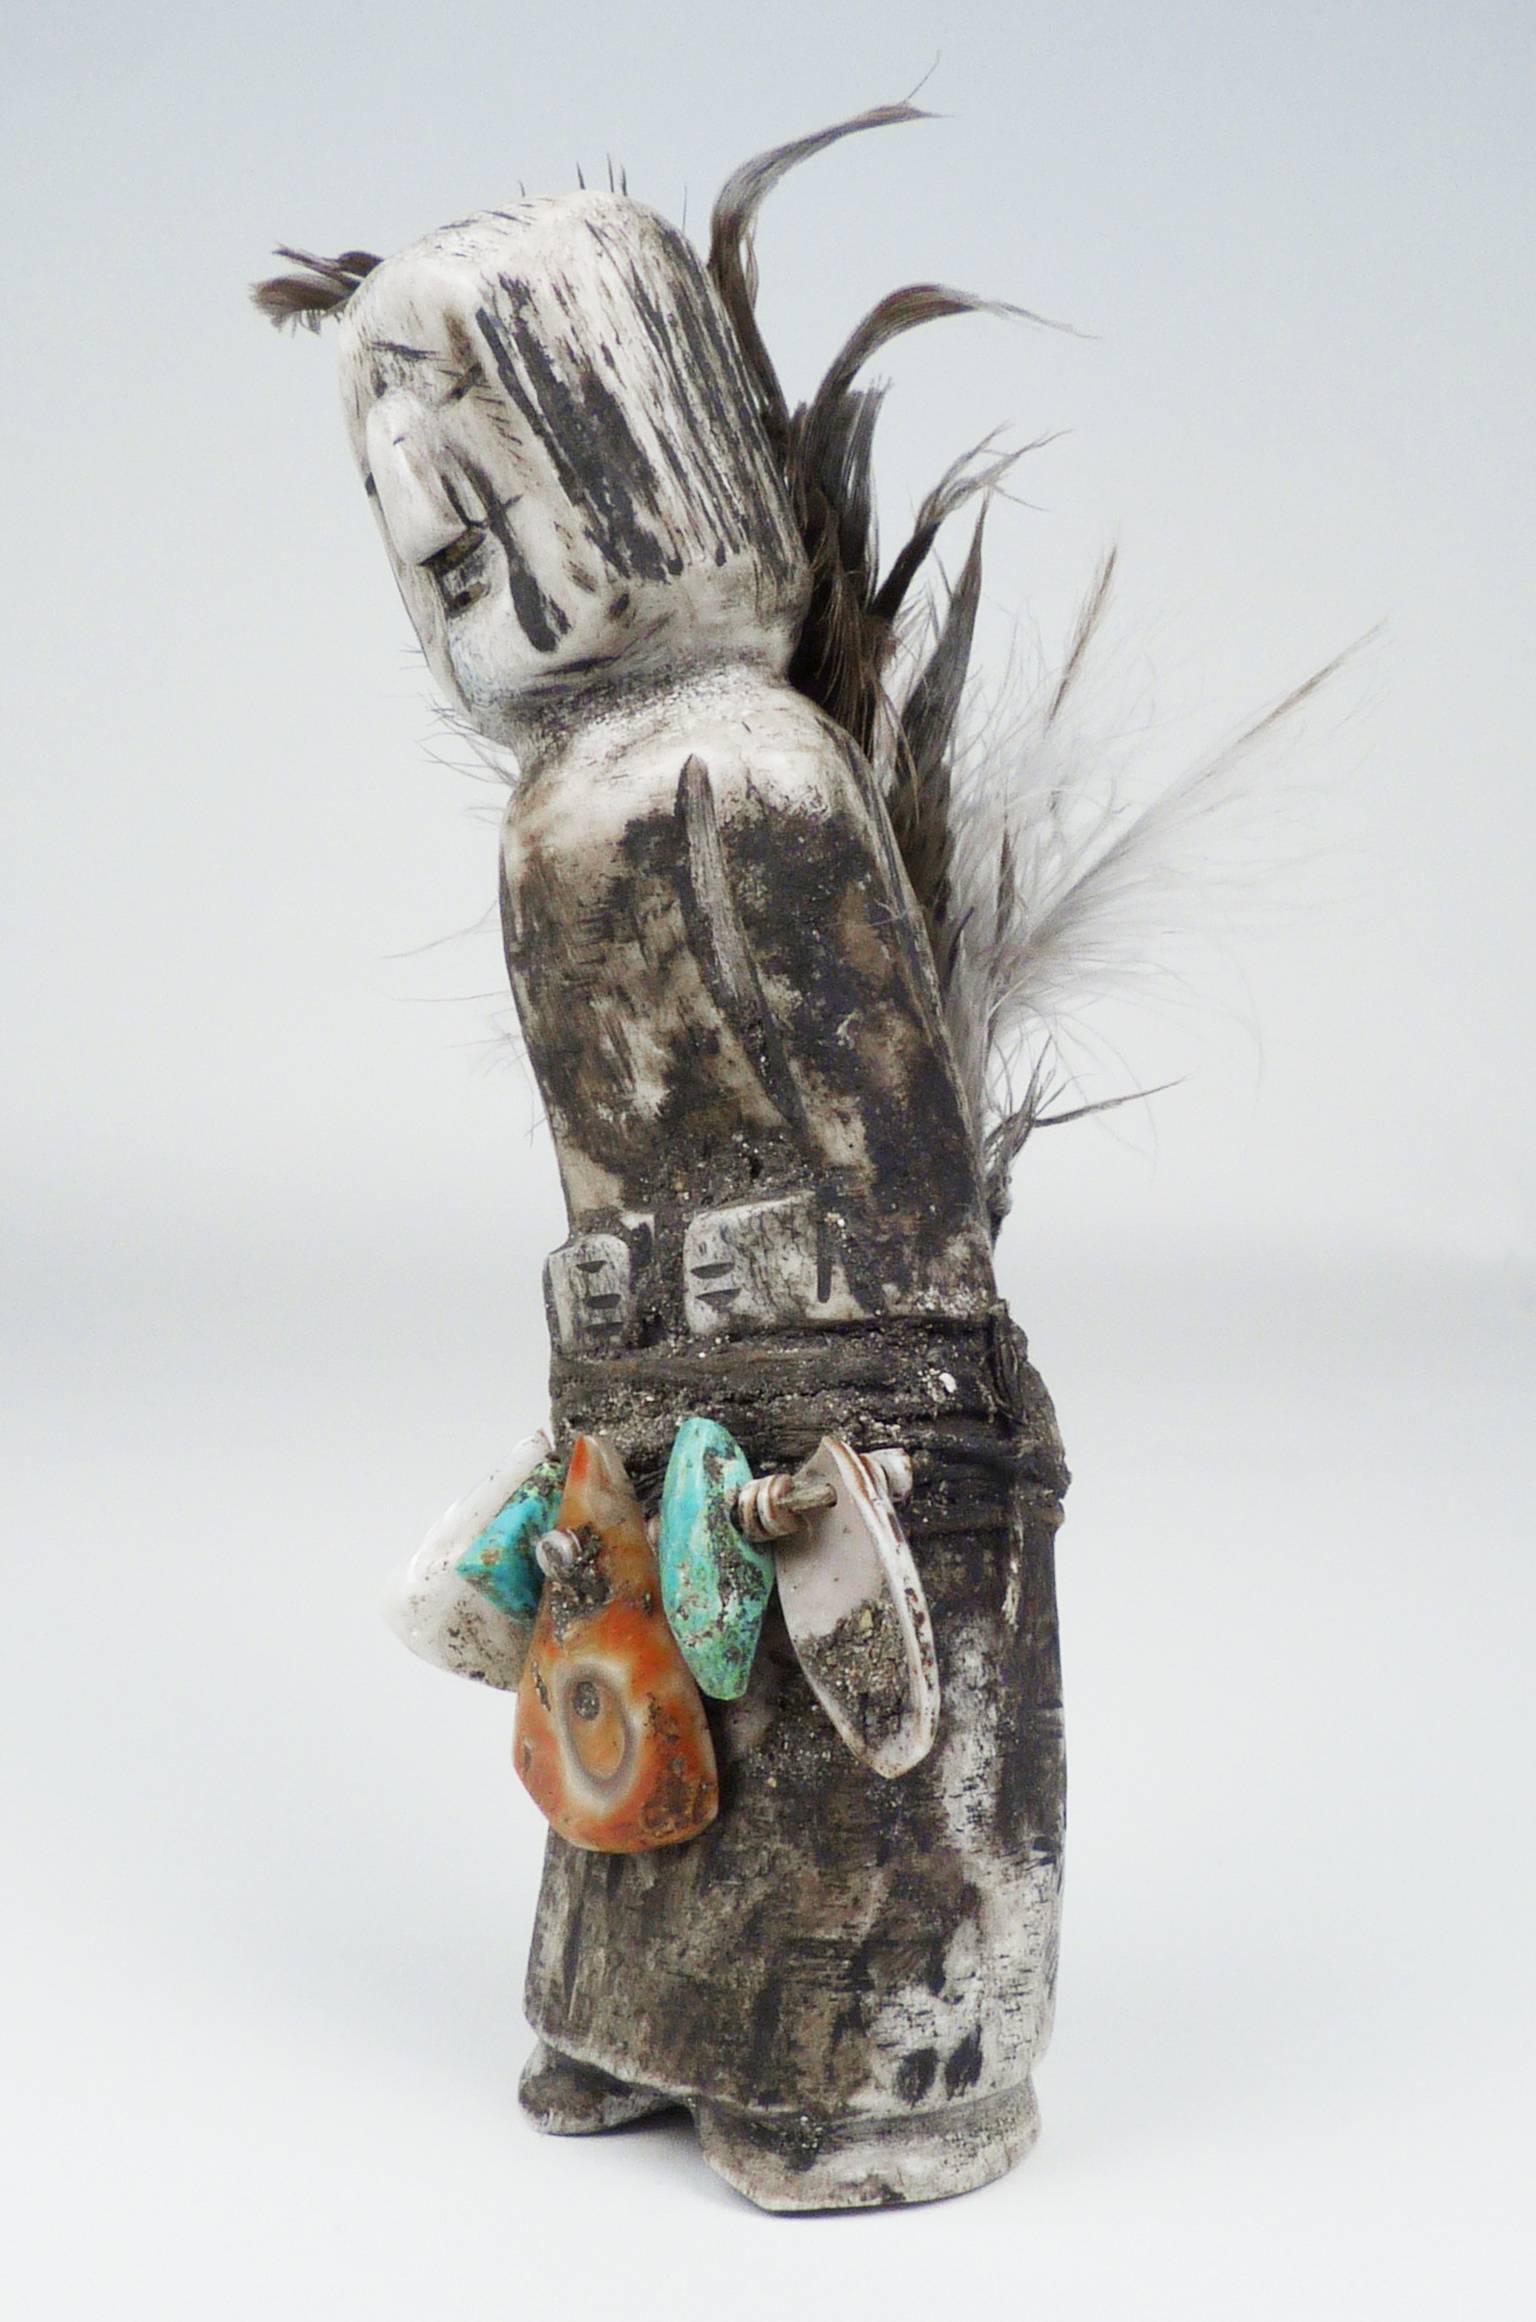 This fetish was carved by Teddy Weahkee (1890-1965), an accomplished painter, silversmith, inlay artist and carver at Zuni Pueblo. Representing a humanoid figure, this fetish is carved from deer antler, decorated with turquoise and shell beads, and